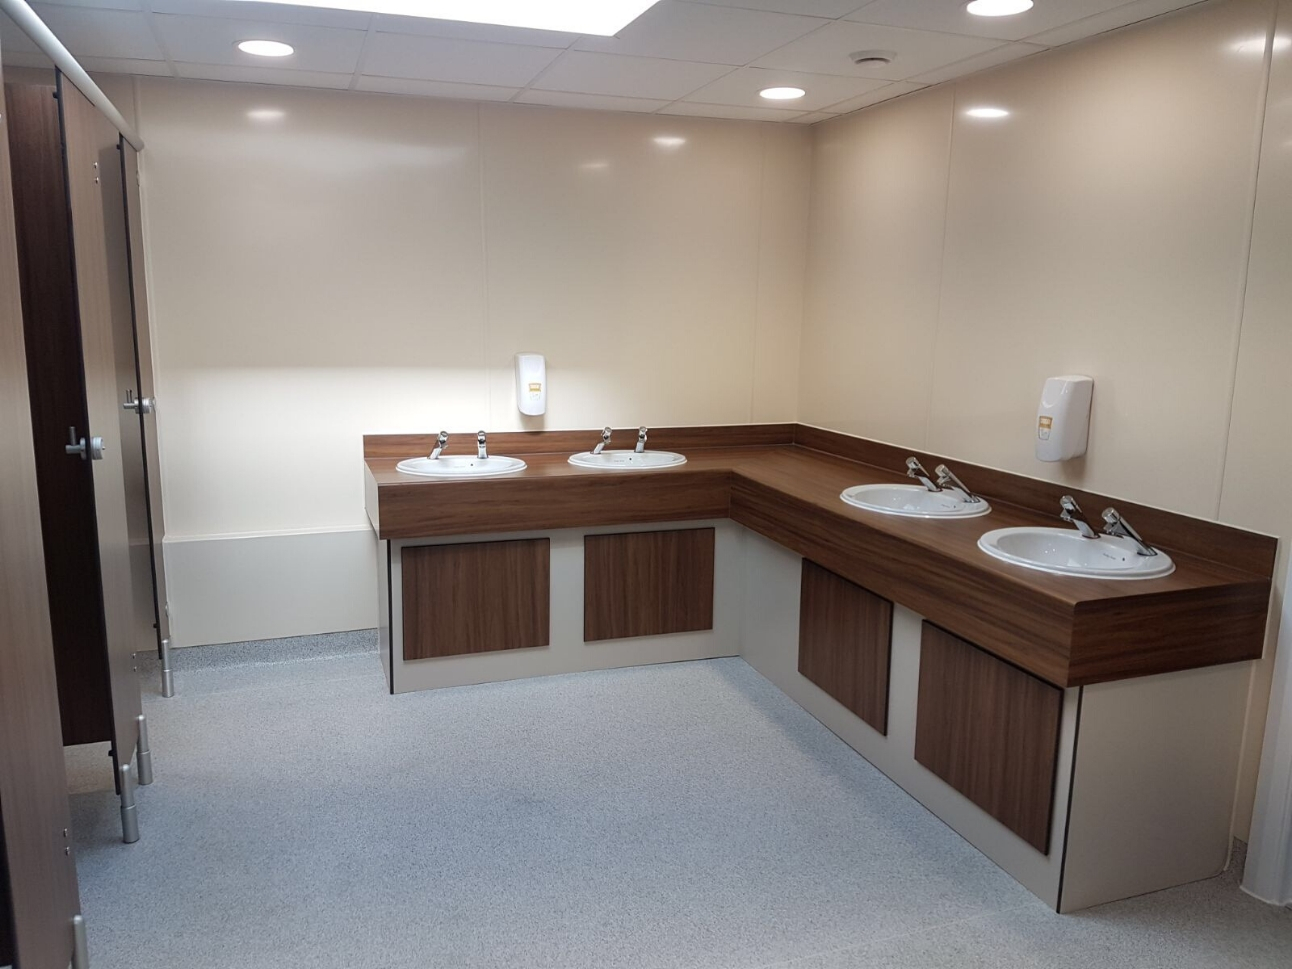 Kent College | Case Study | Commercial Washrooms